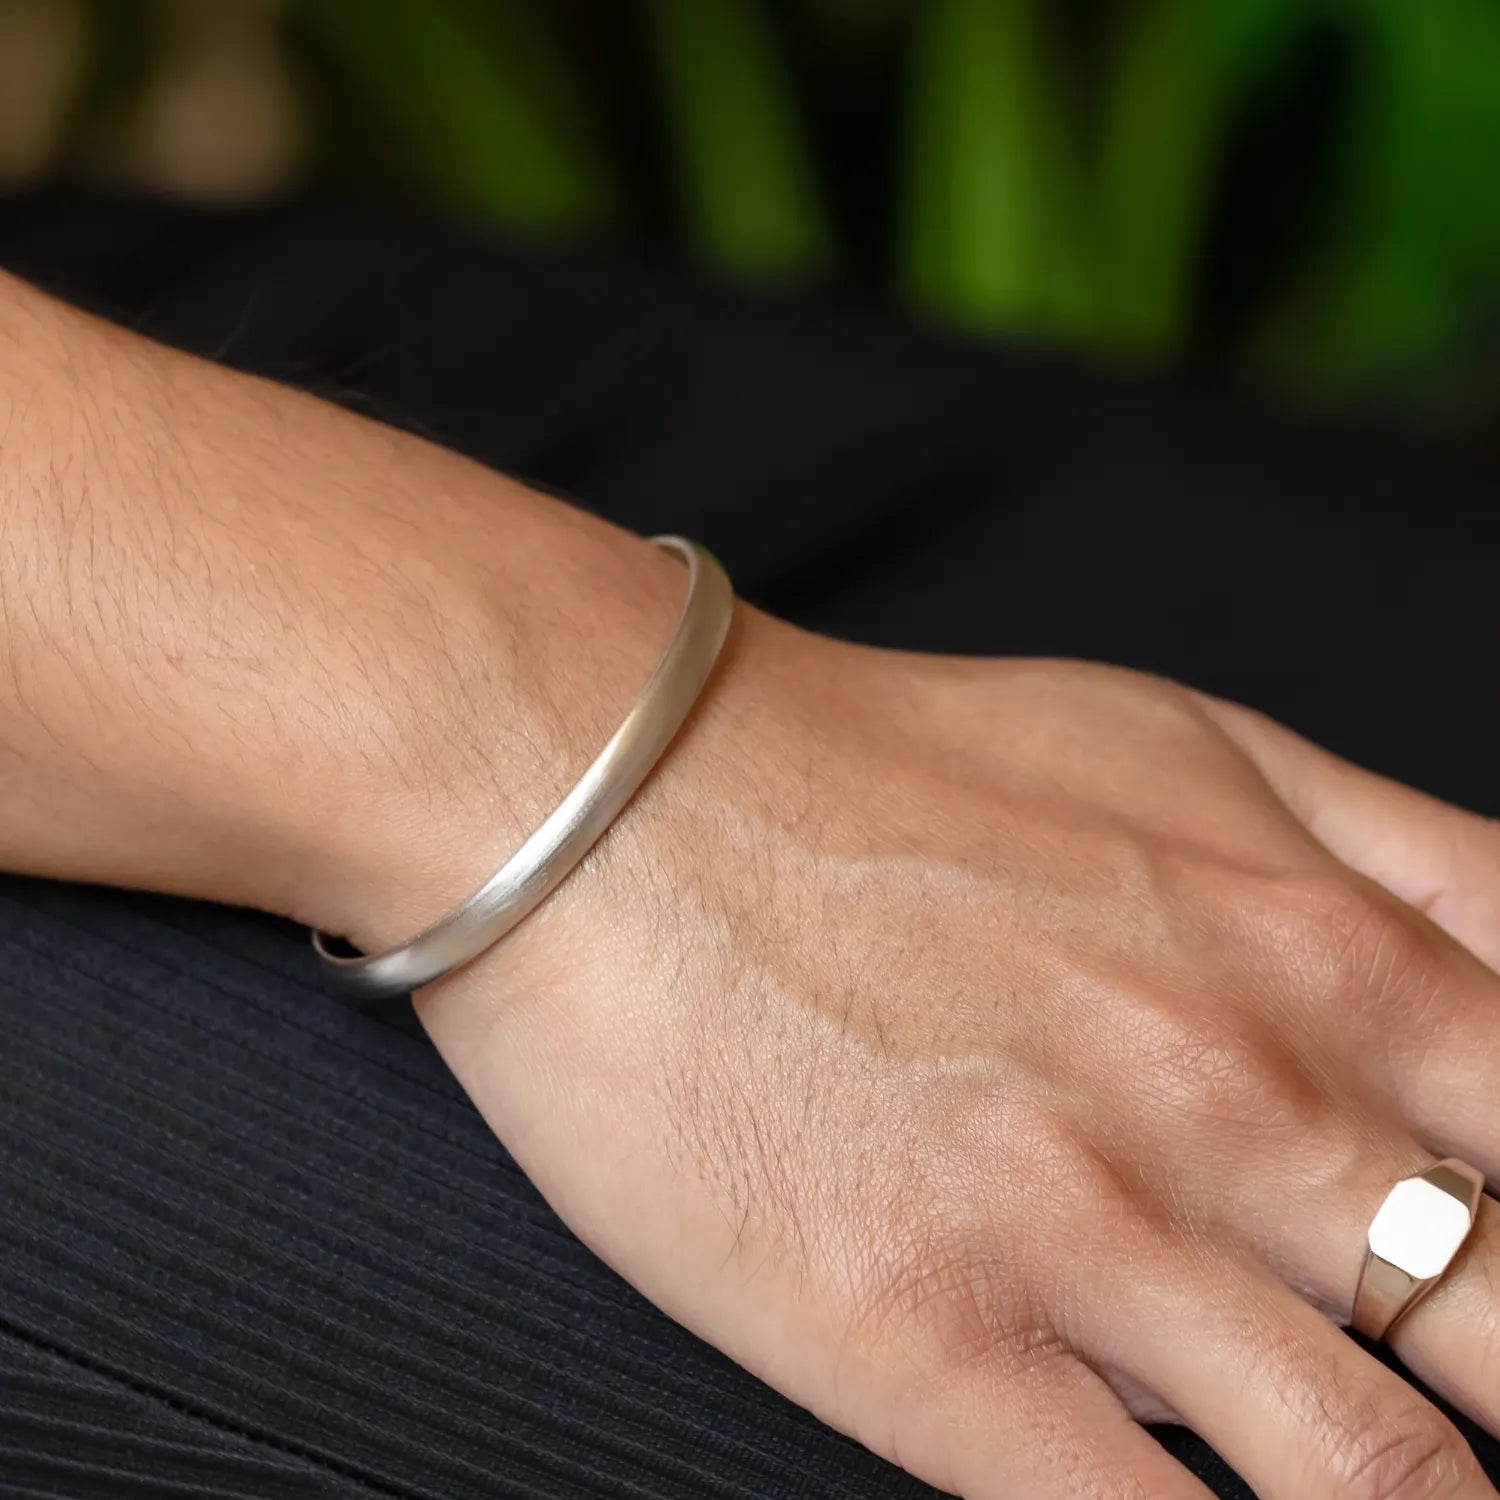 925 silver adjustable cuff bangle on right resting on top of plissé pants